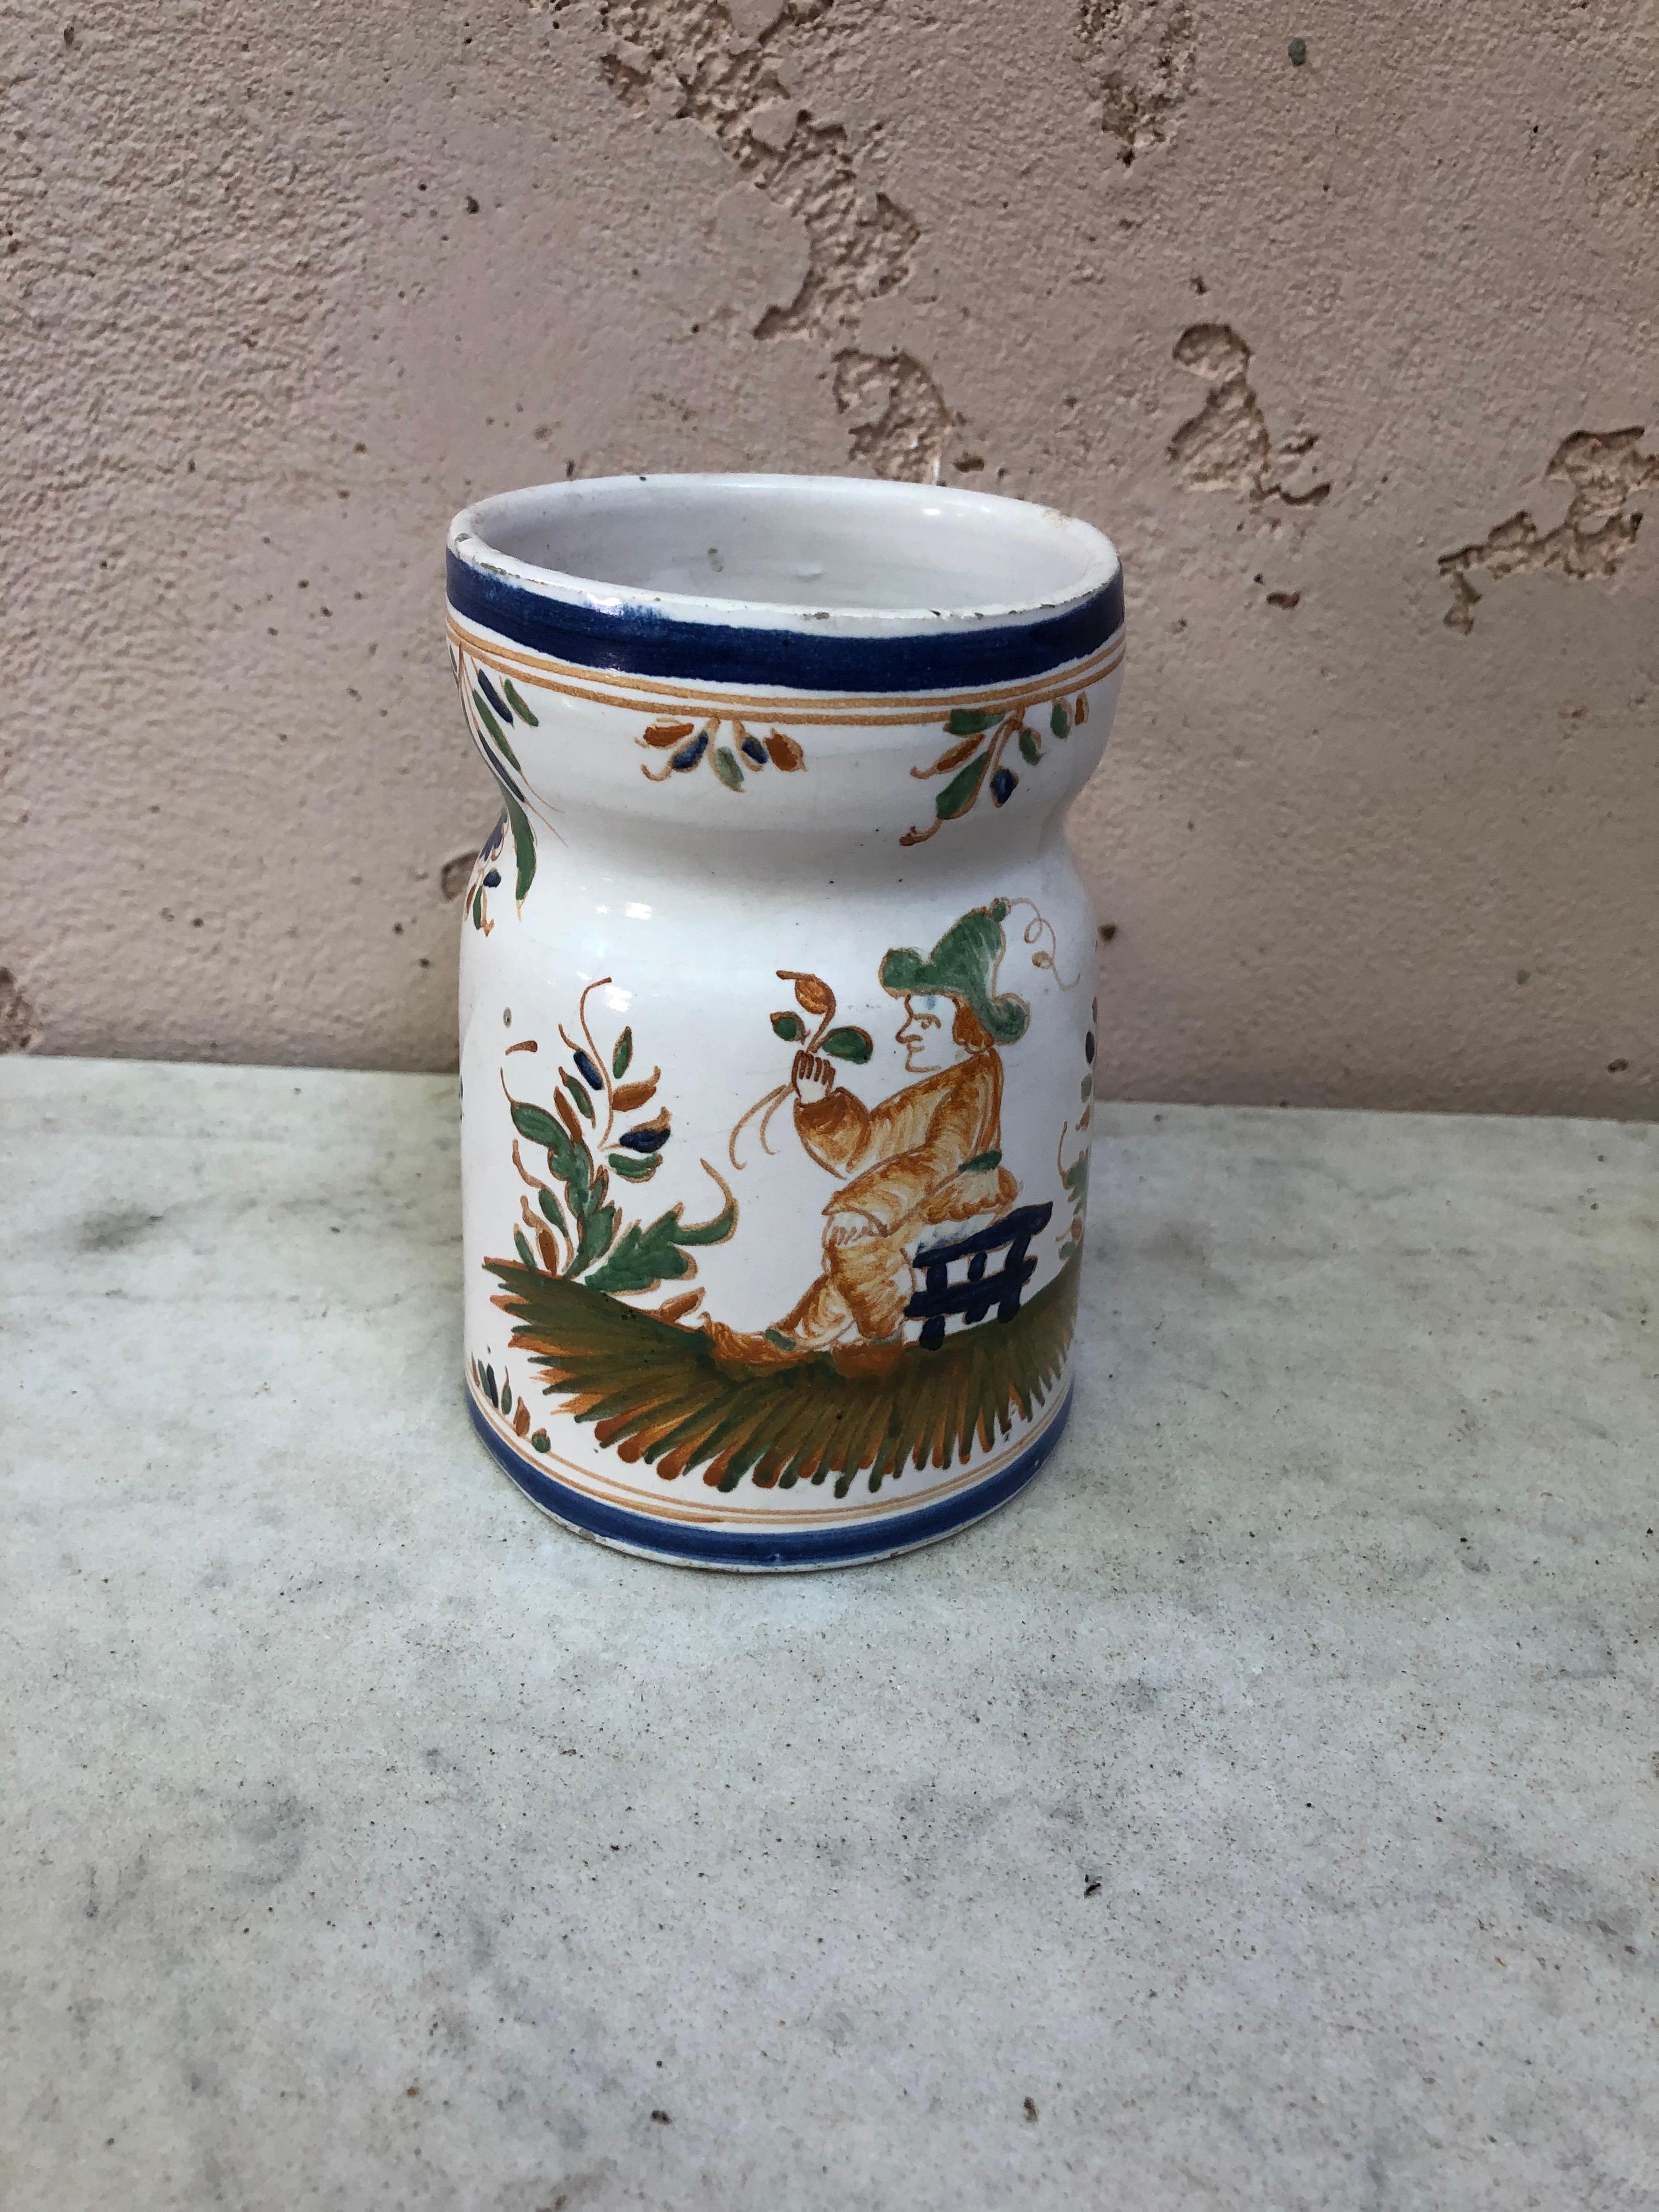 Rustic French Faience Pitcher with floral paintings and man sitting on a fence circa 1920.
Moustiers Style.